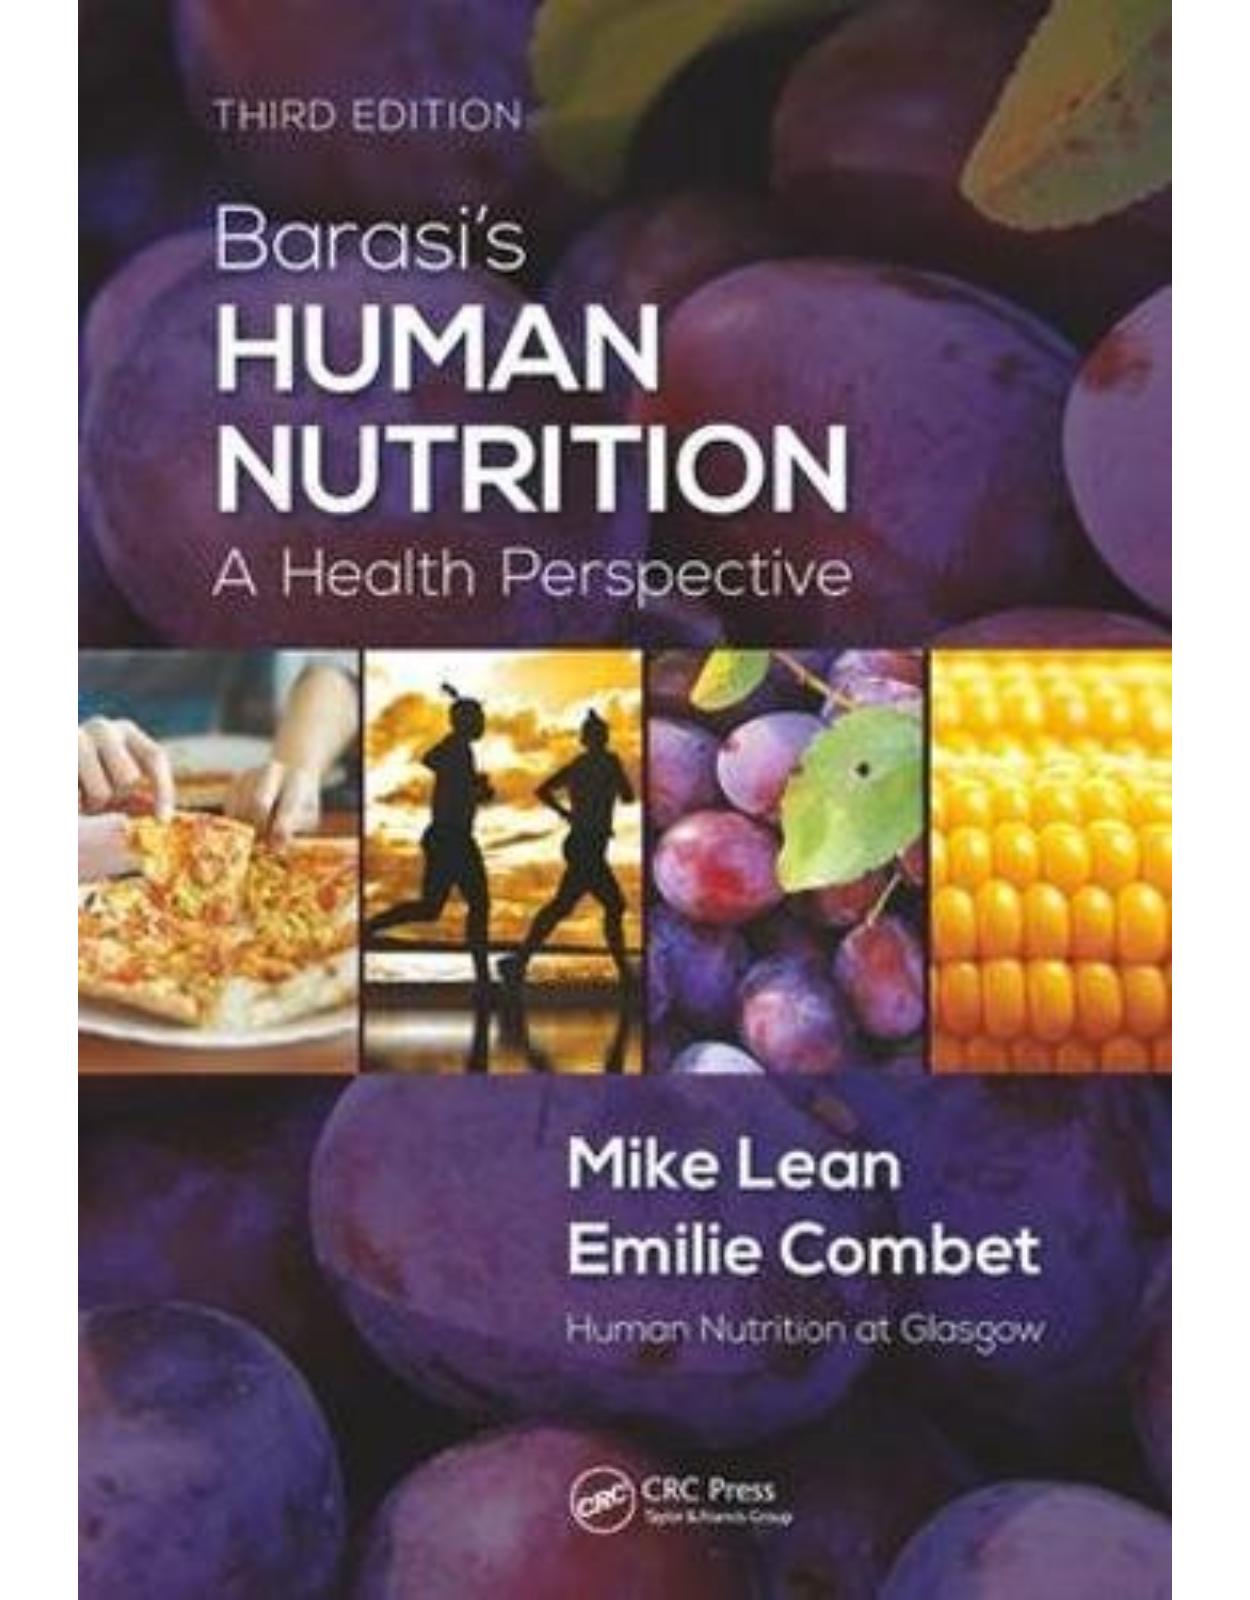 Barasi's Human Nutrition: A Health Perspective, Third Edition